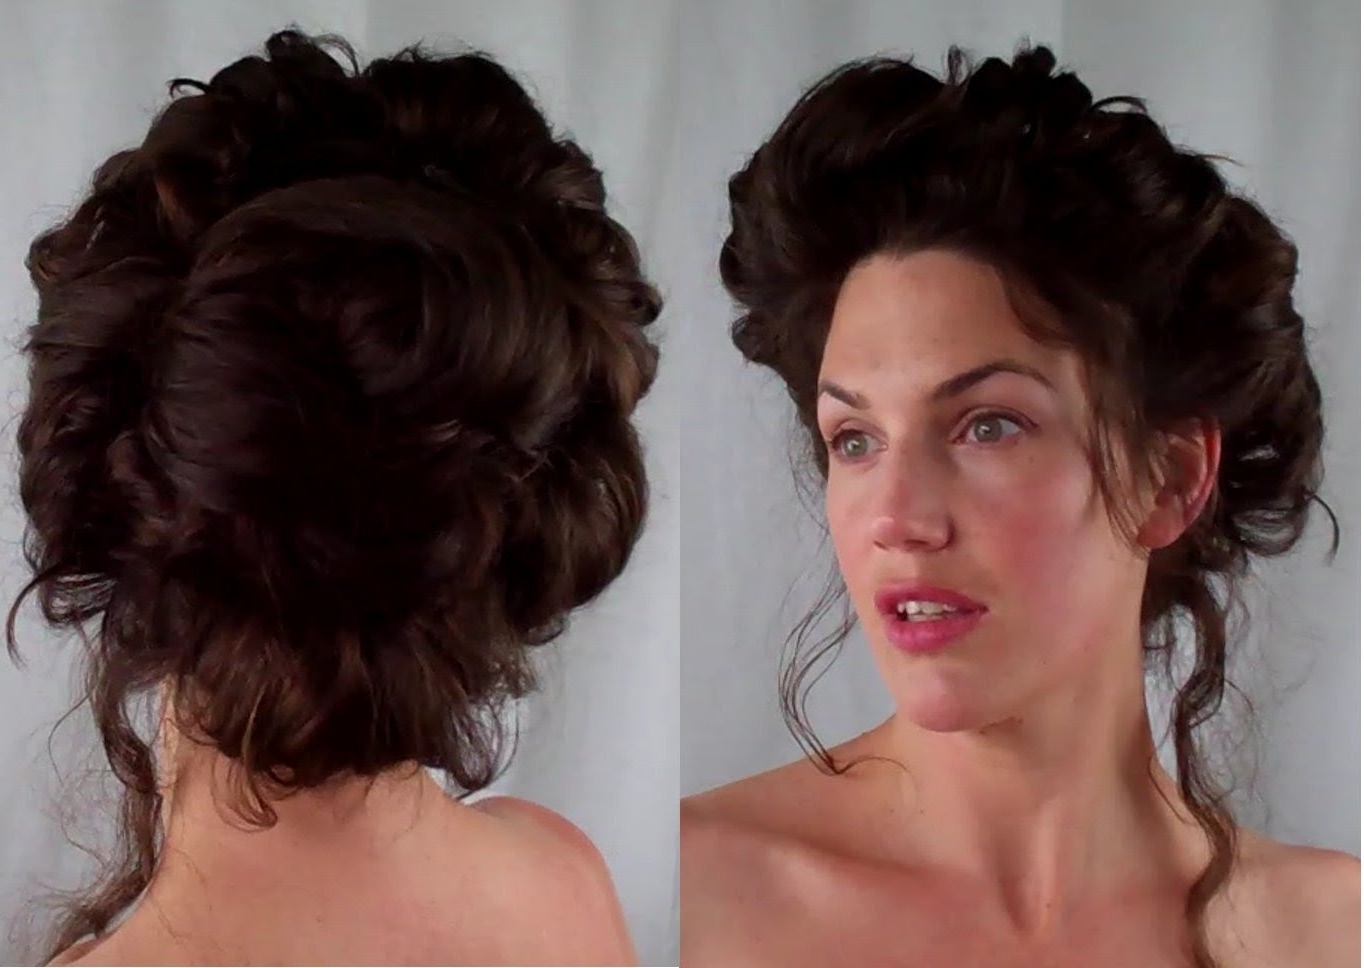 Can You Name These Retro Hairstyles? How To Gibson Girl Hair Edwardian/ Victorian Vintage Retro pertaining to Victorian Hairstyle Tutorial